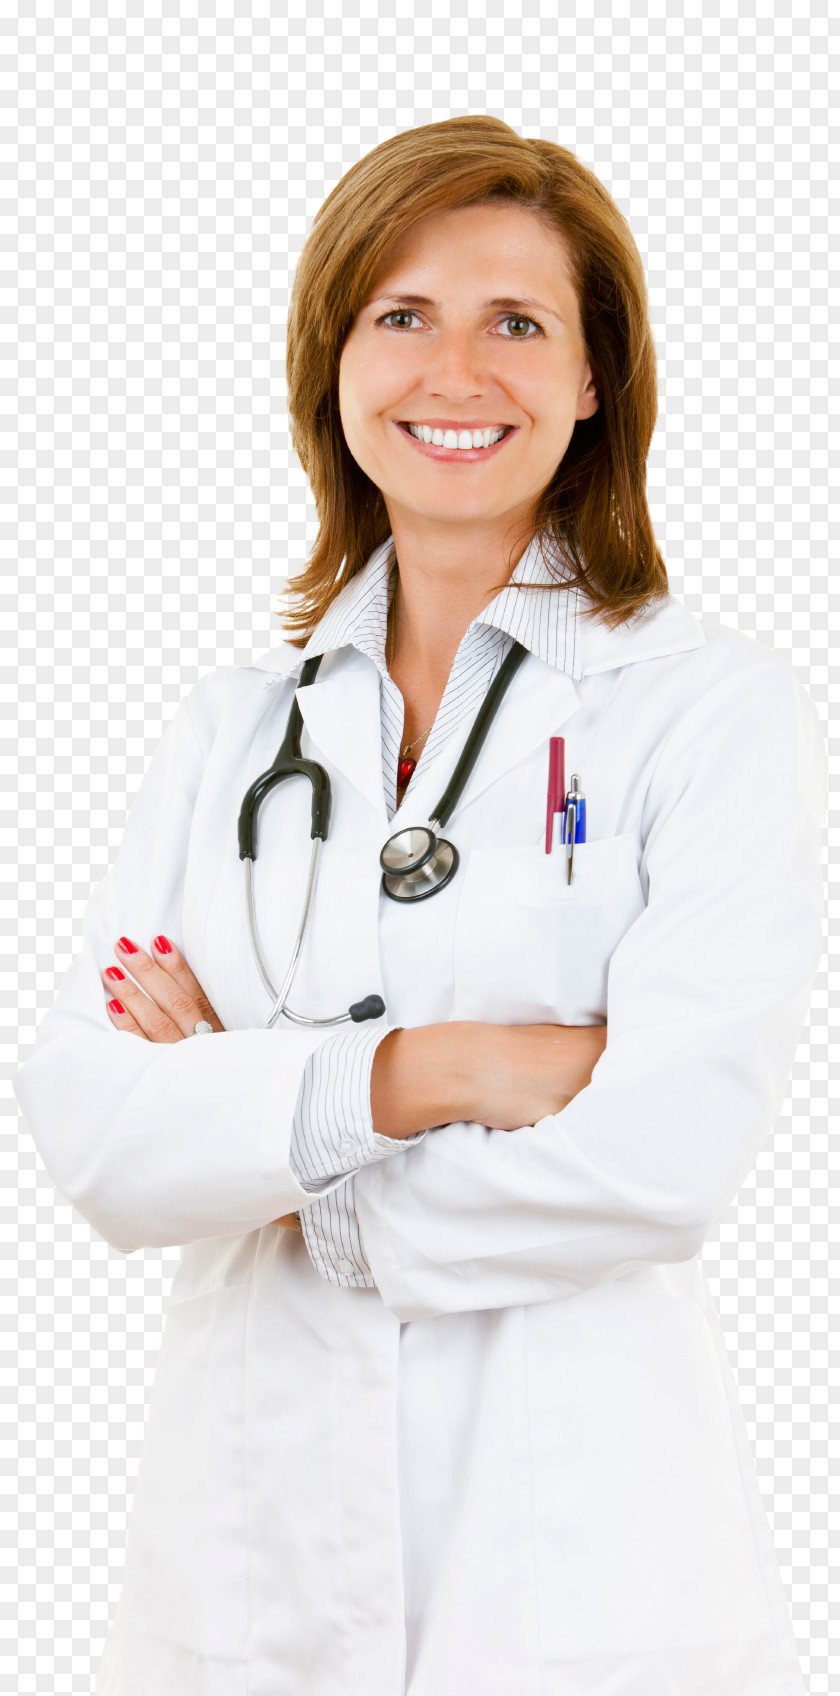 Female Doctor Physician Family Medicine Health Care Hospital PNG